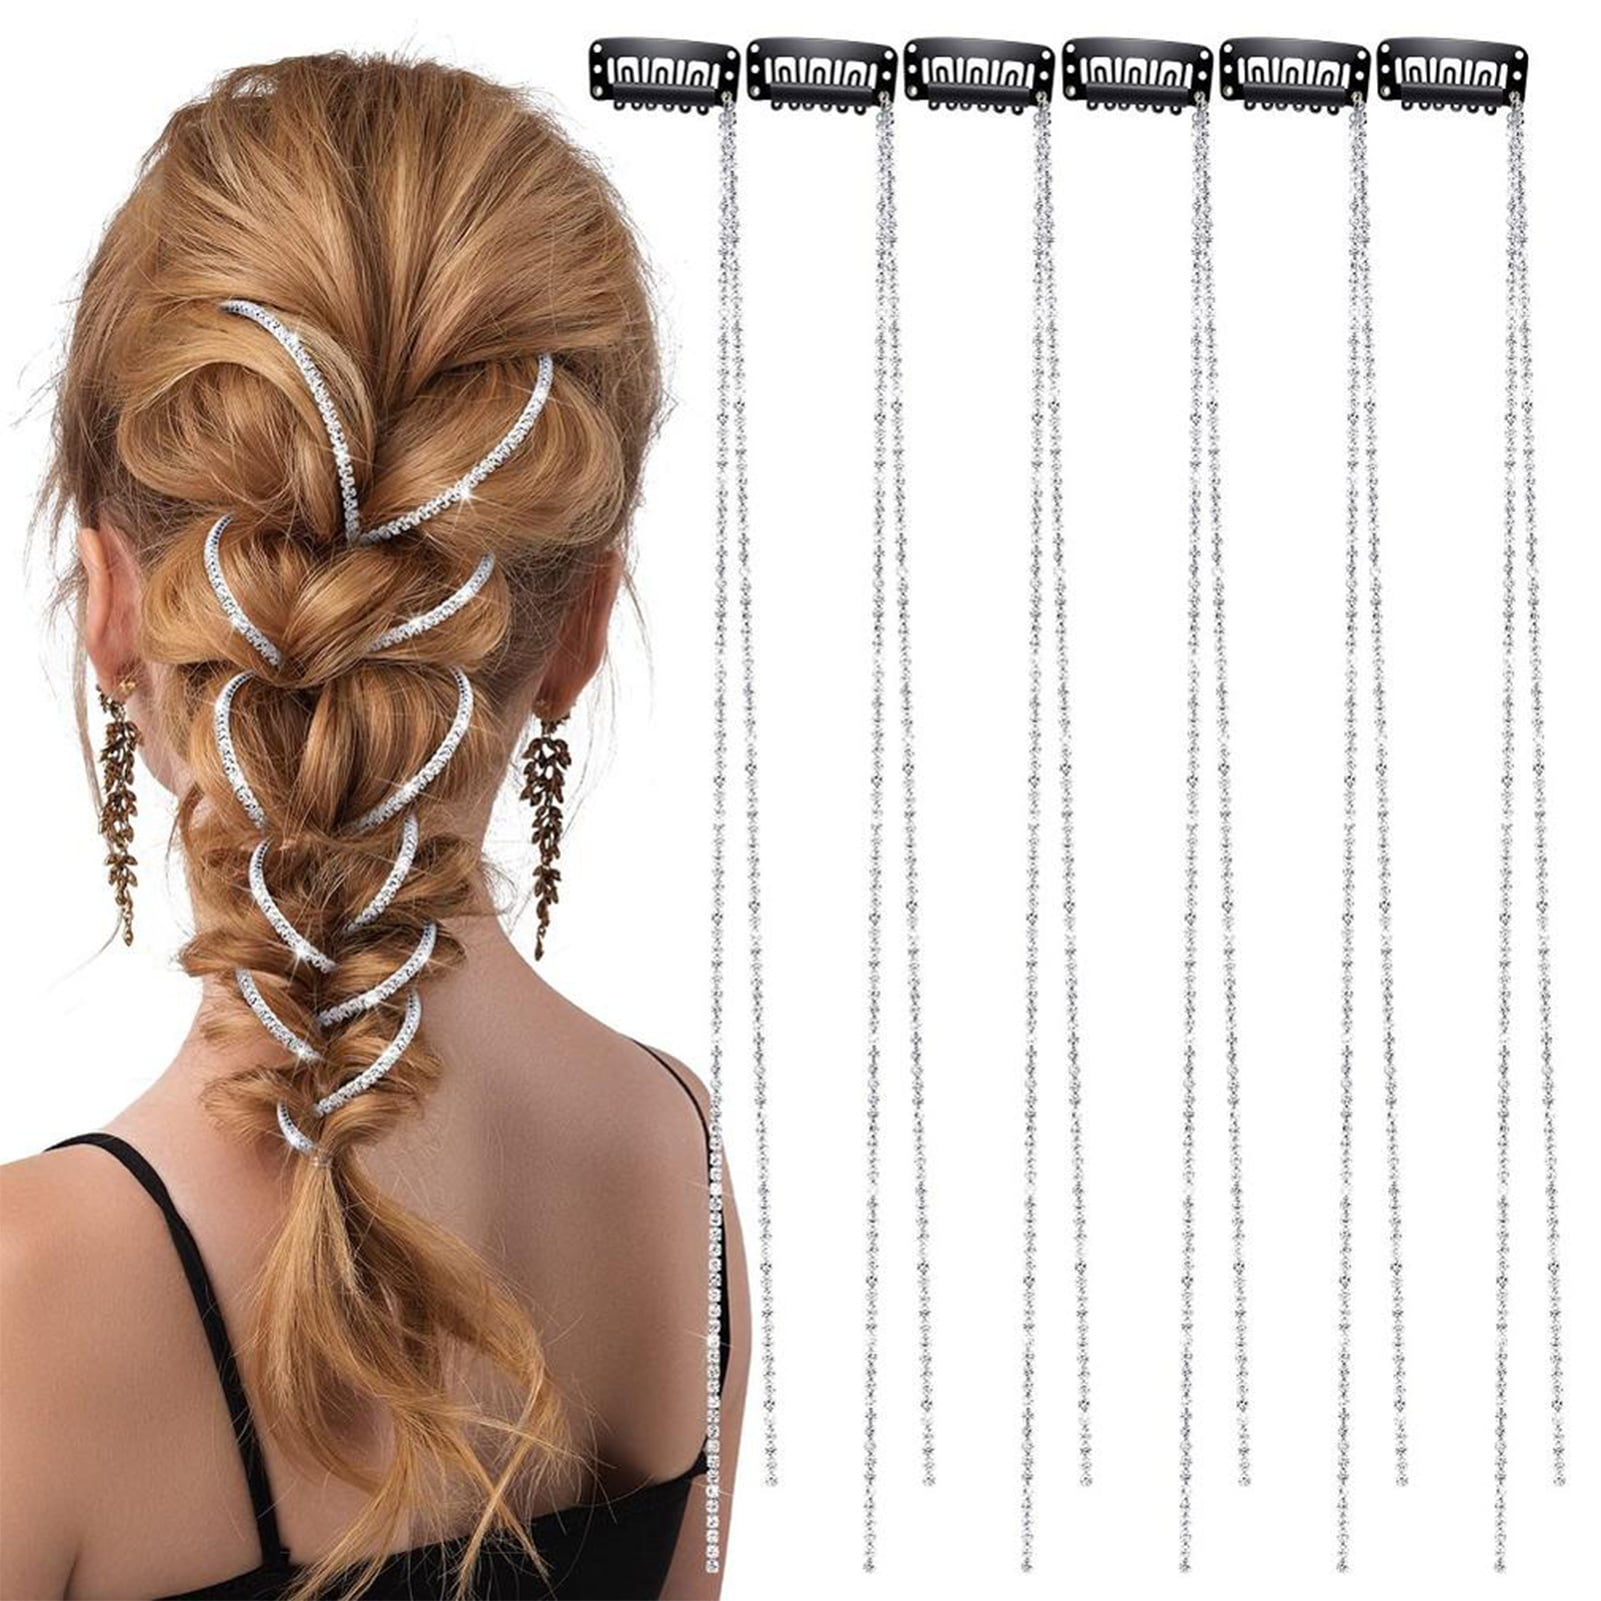 Rhinestone Hair Chains - Hair String Bling Strand For Enhance Your Hairstyle  6Pcs - Tassel Hair Chain Add Sophisticated And Elegant Touch To Hair And  Comfortable To Wear 